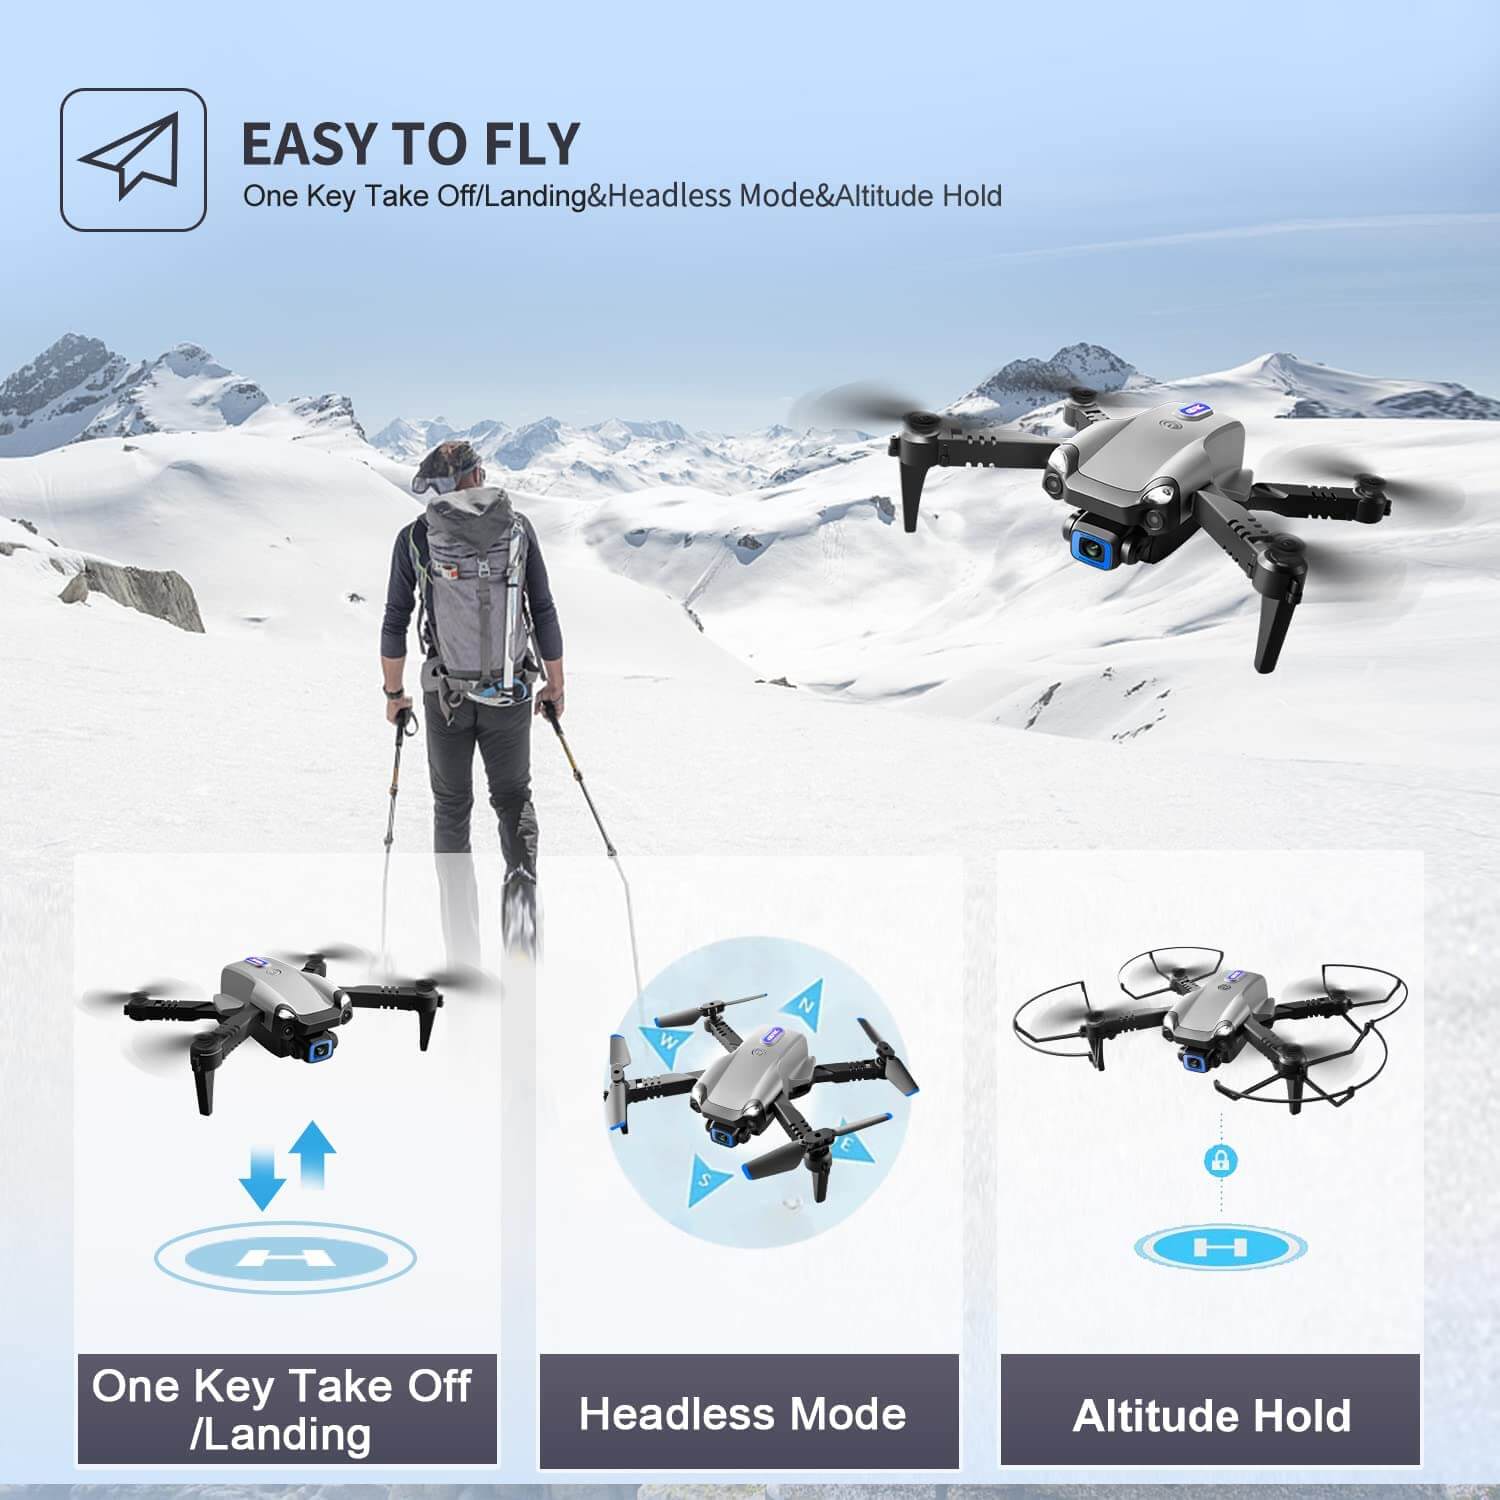 4DRC Mini Drone With 720p Camera for Kids and Adults, FPV Drone Beginners  RC Foldable Live Video Quadcopter,3D Flips and Headless Mode,One Key